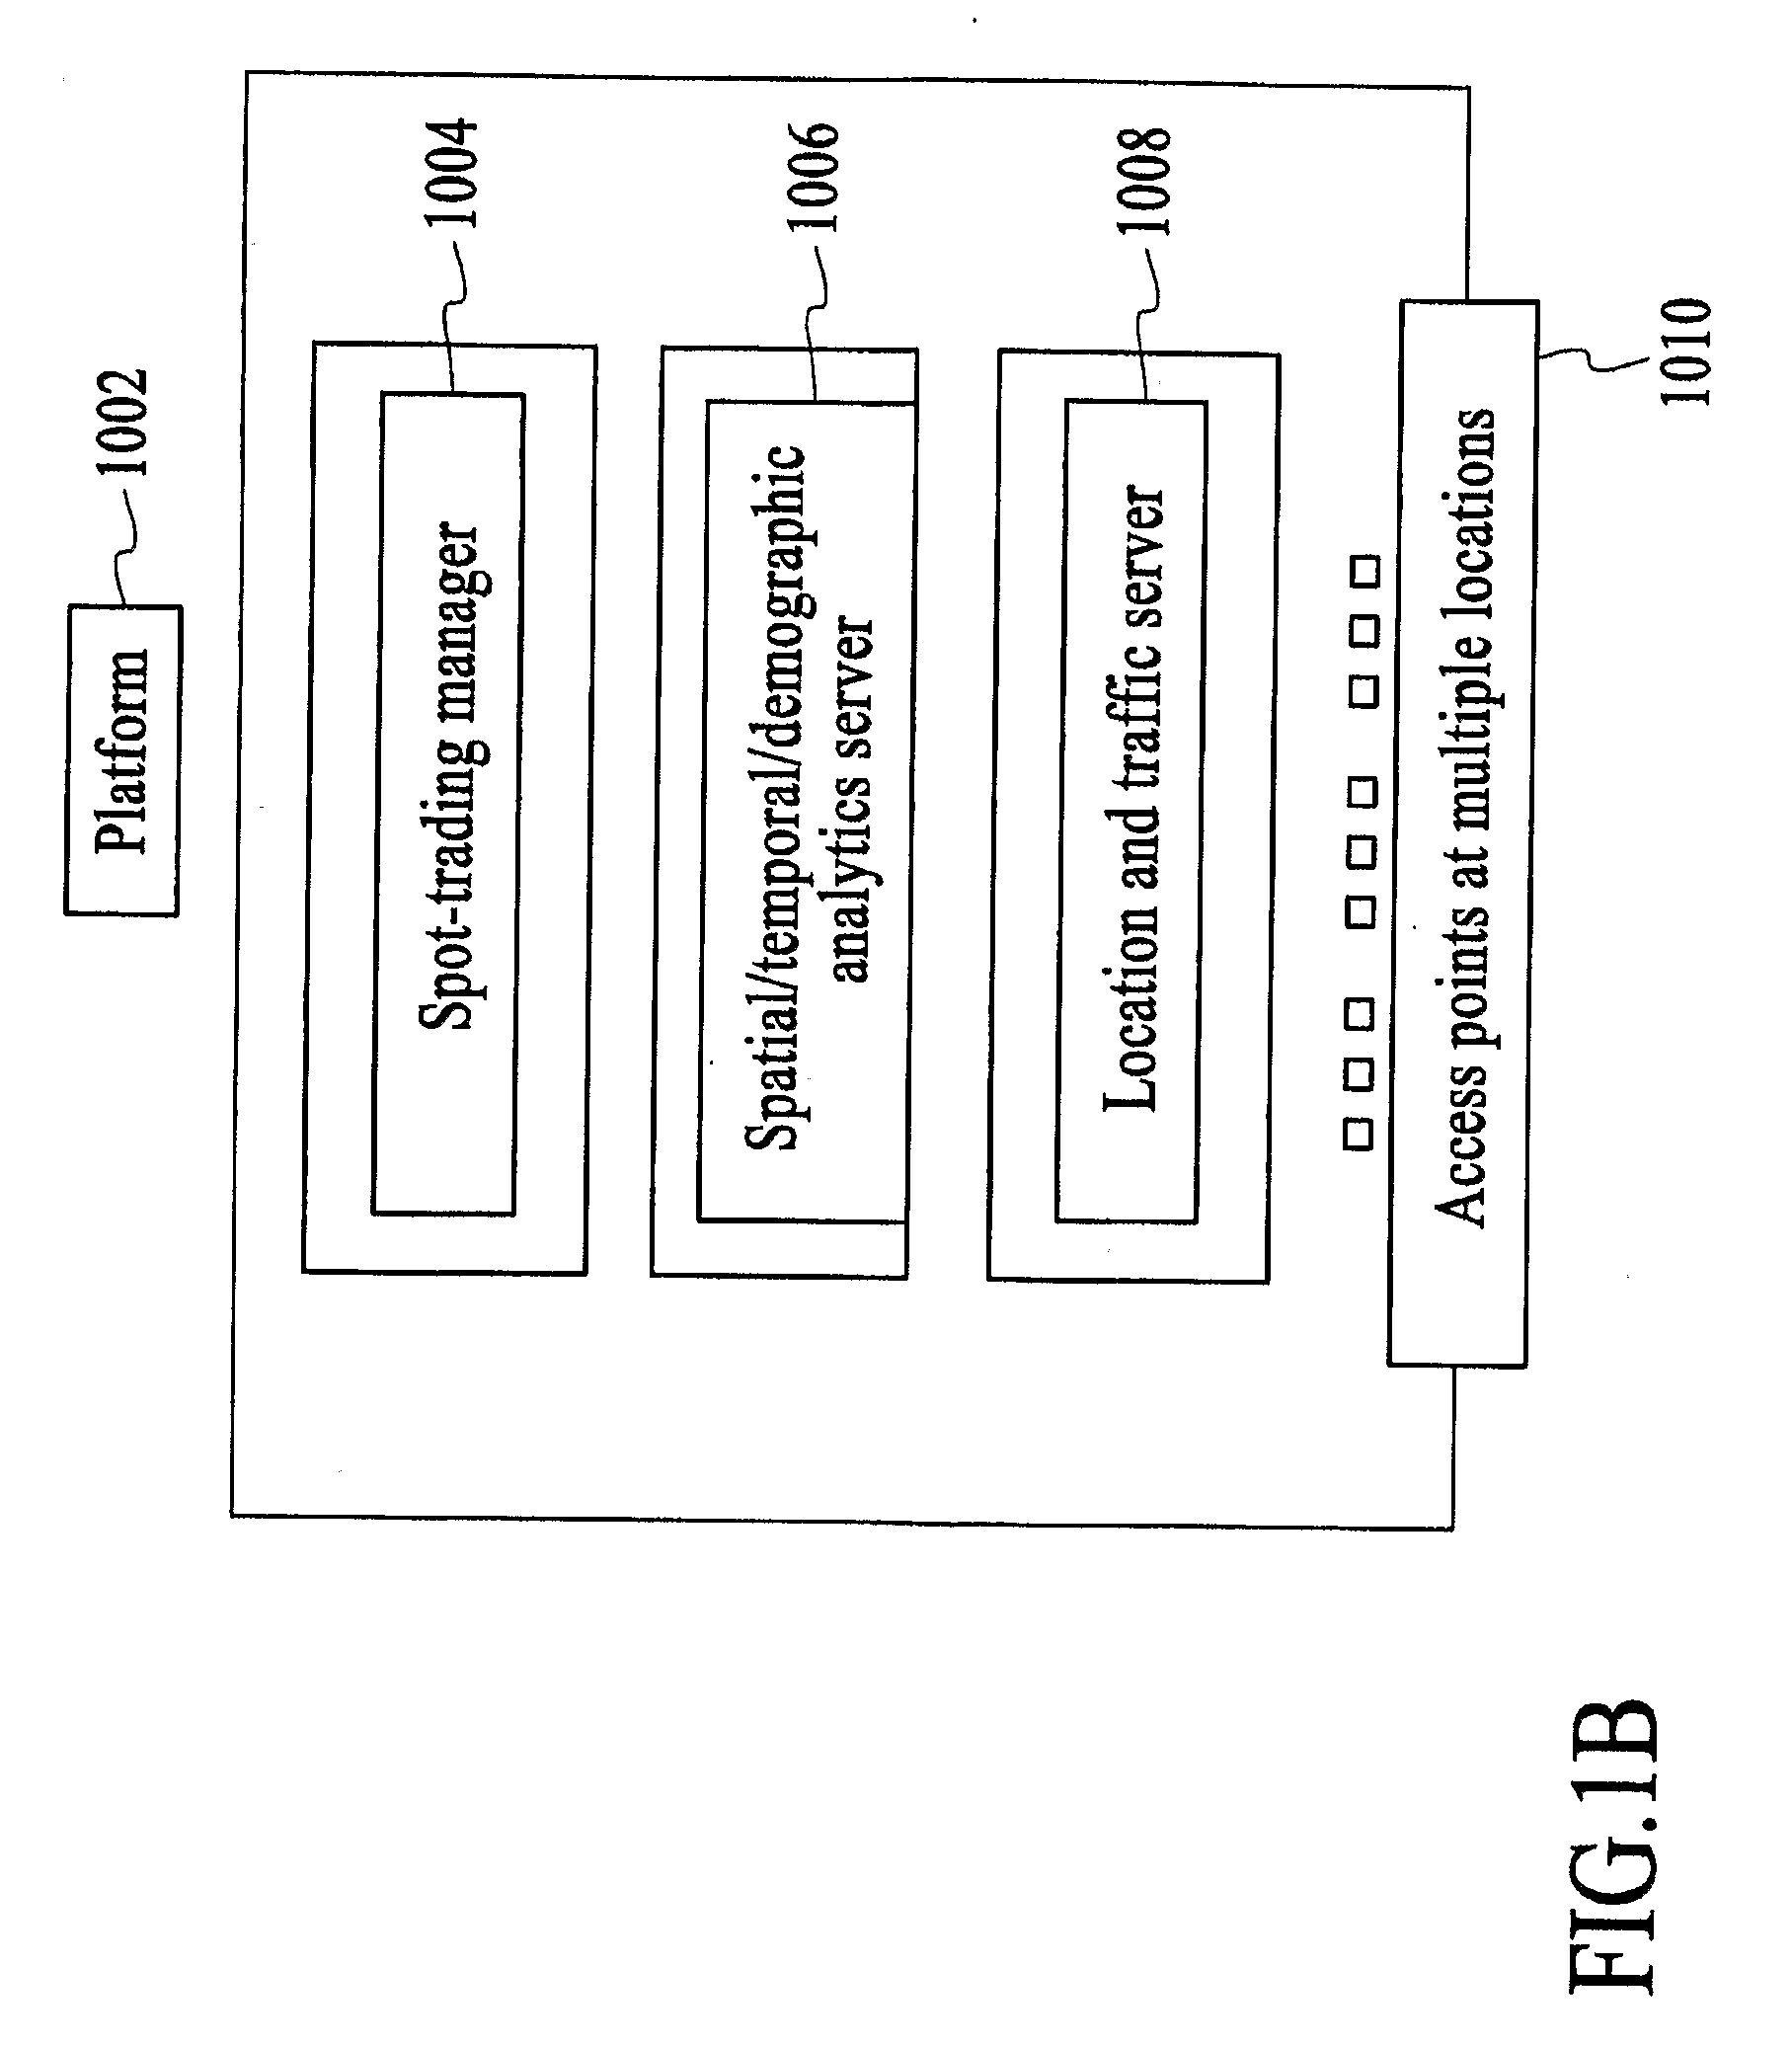 Systems and Method of Network Operation and Information Processing, Including Data Acquisition, Processing and Provision, Including Data Acquisition, Processing and Provision and/or Interoperability Features